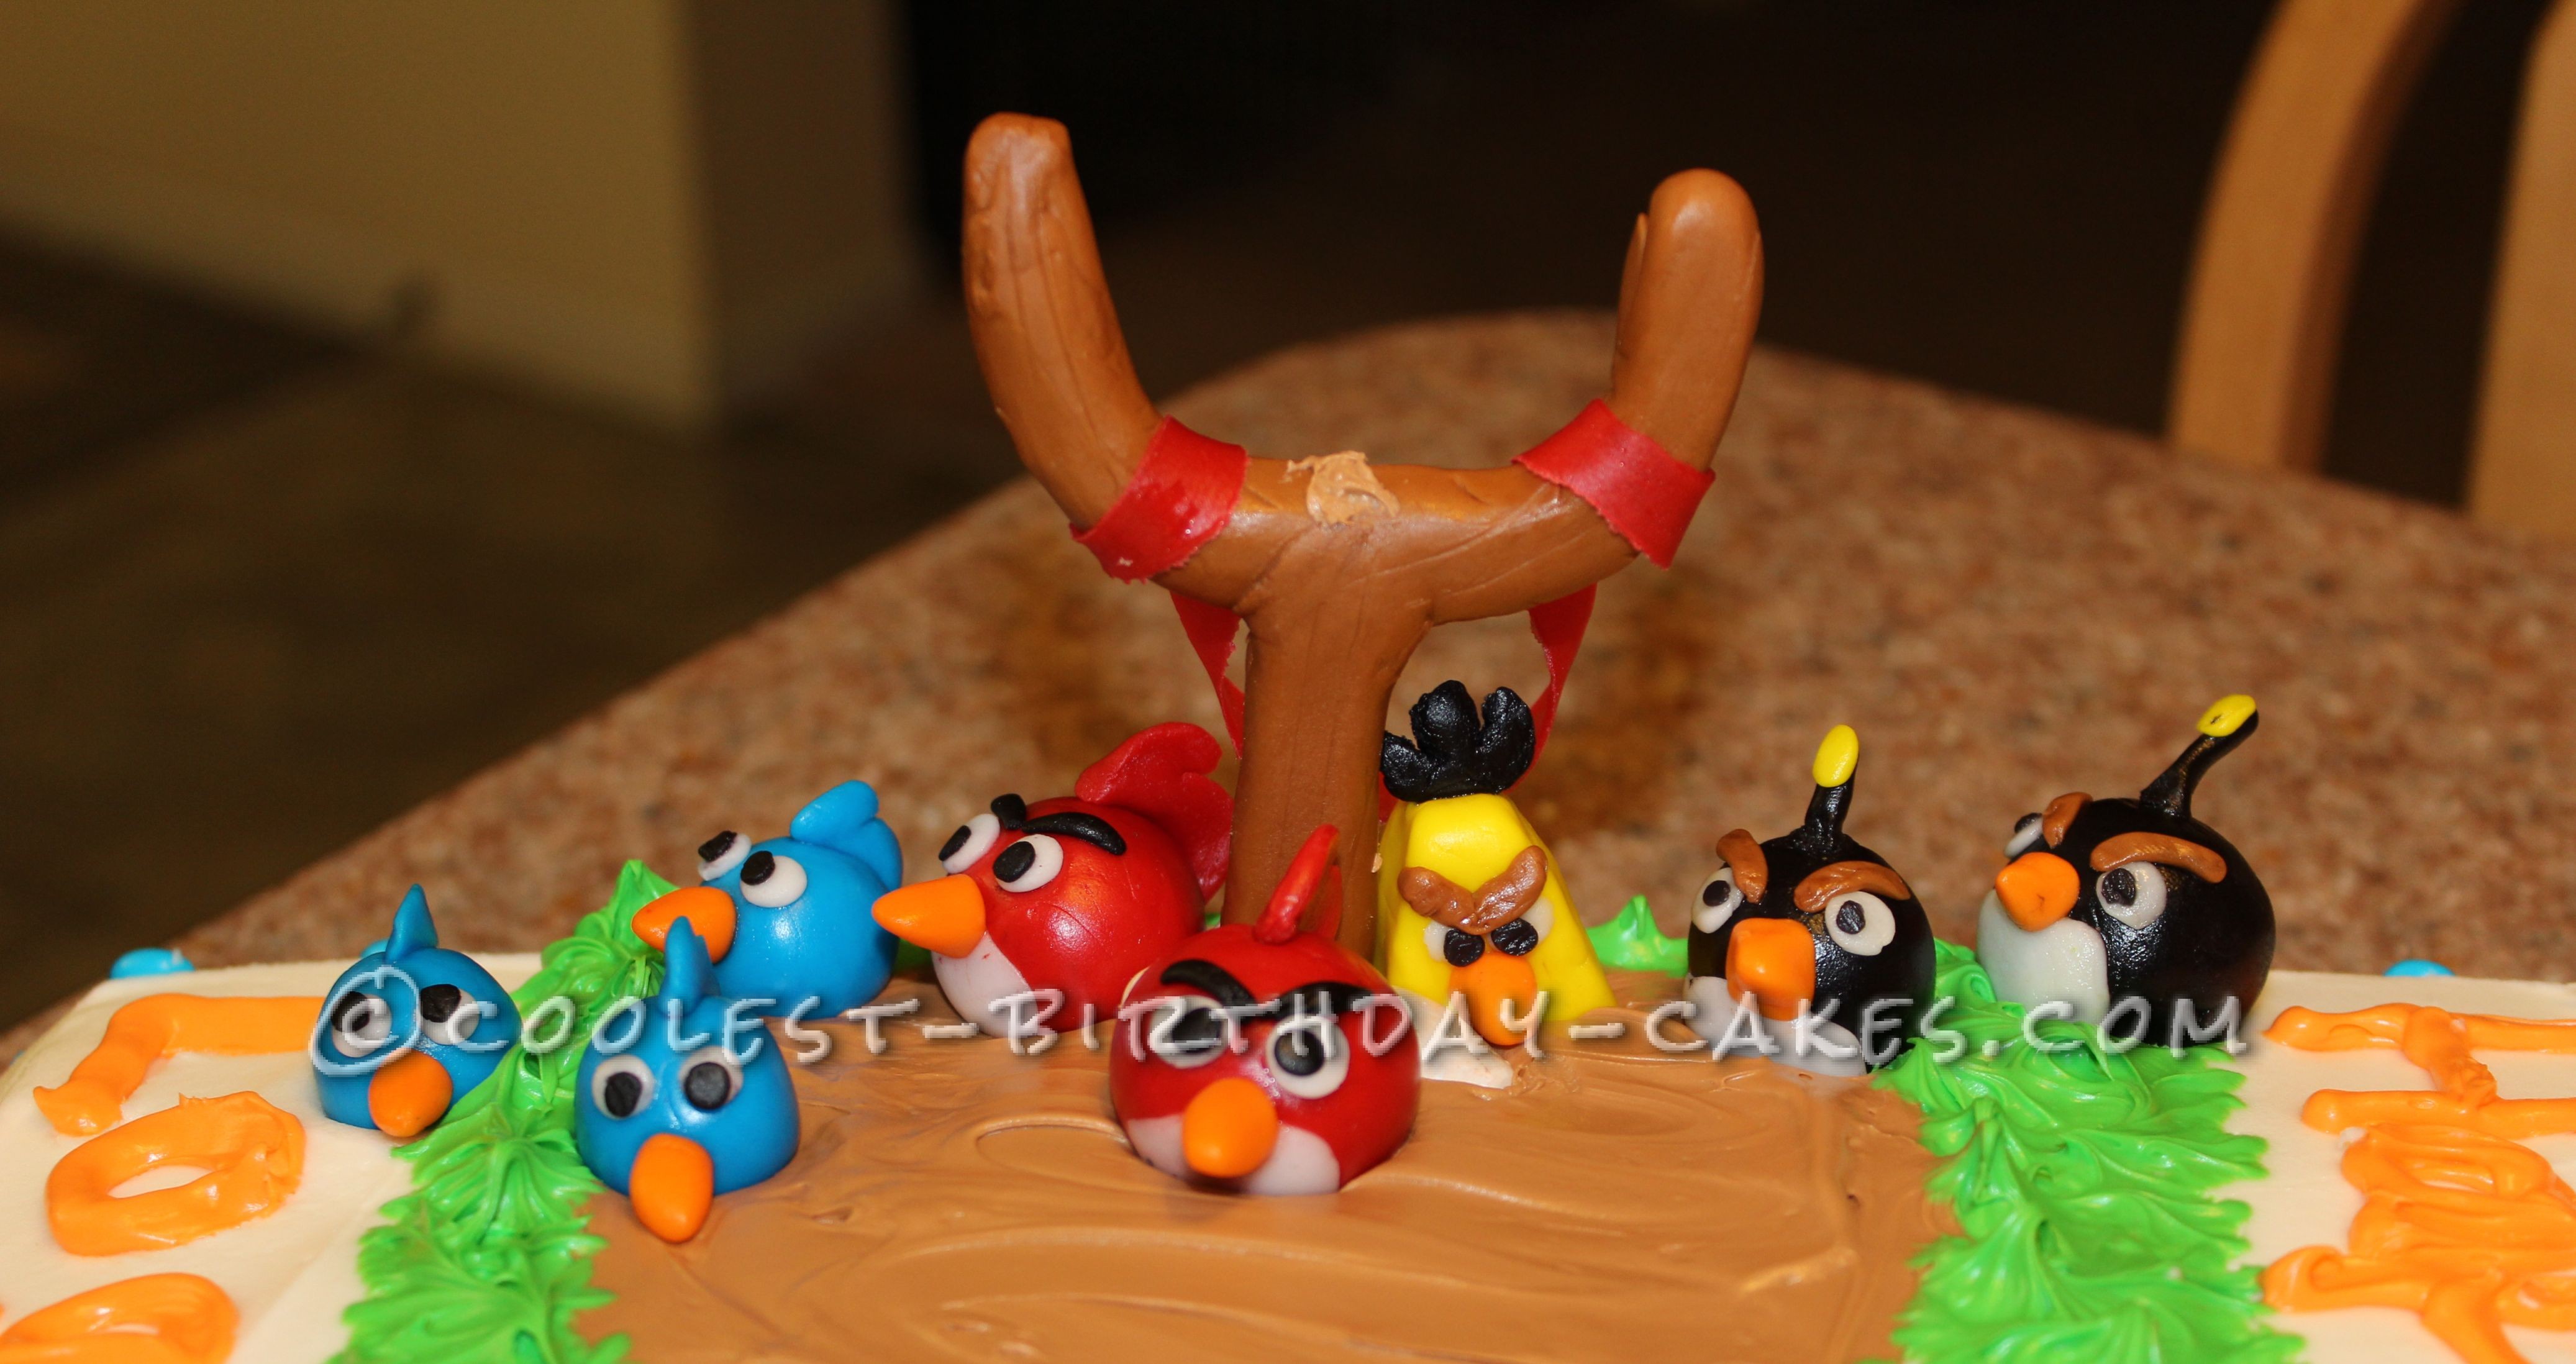 Coolest Angry Birds Birthday Cake